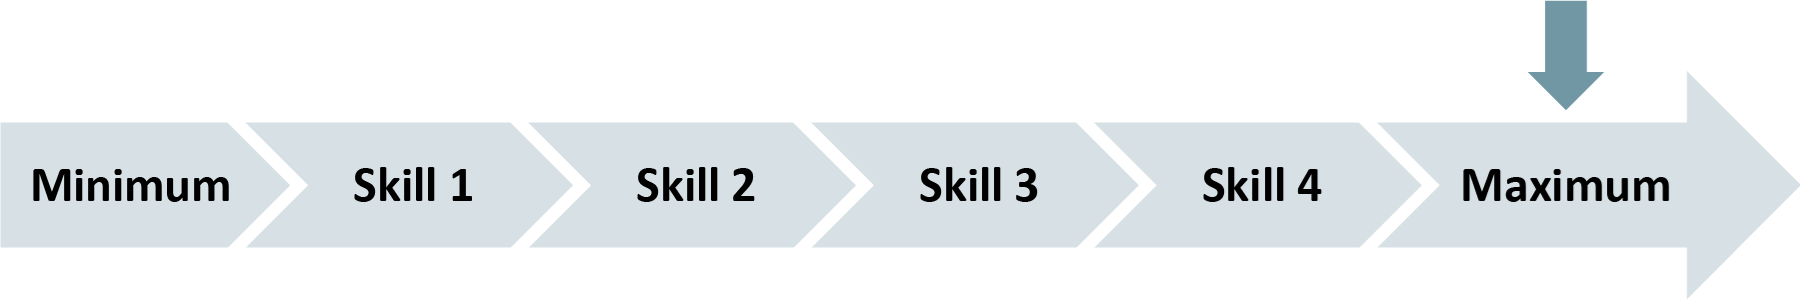 Skill-based pay structure